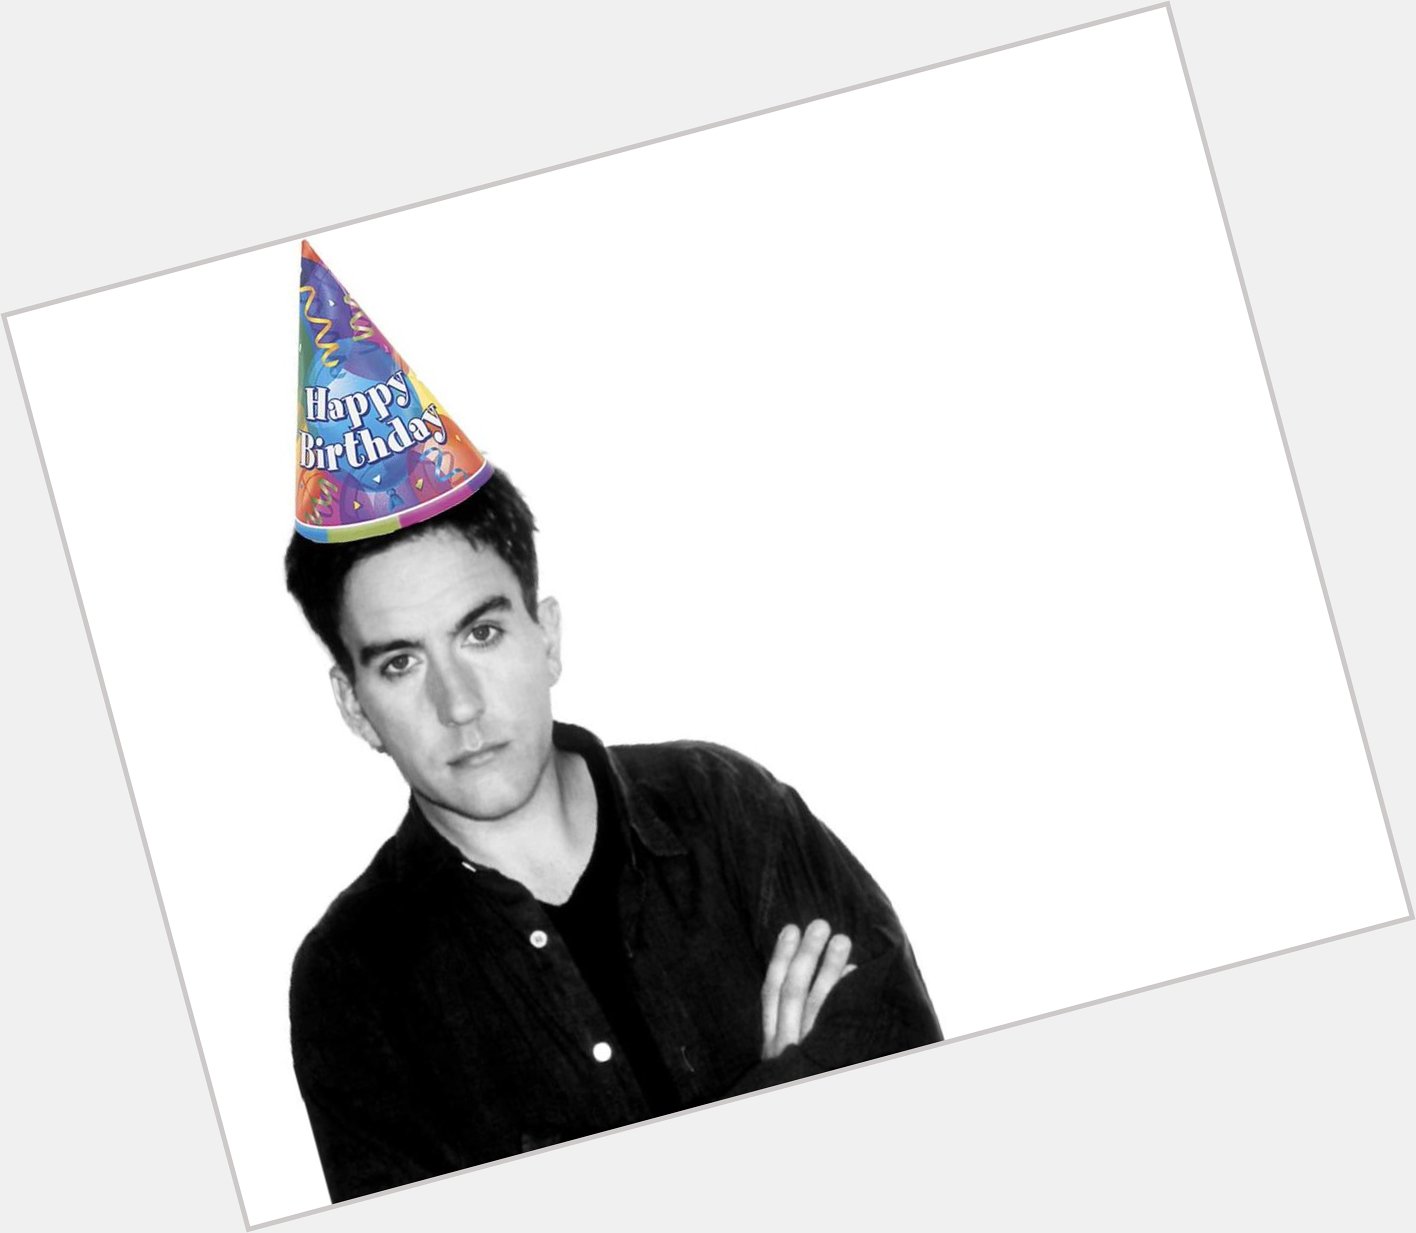 Happy birthday to Terry, from all at Terry Hall Fanpage 